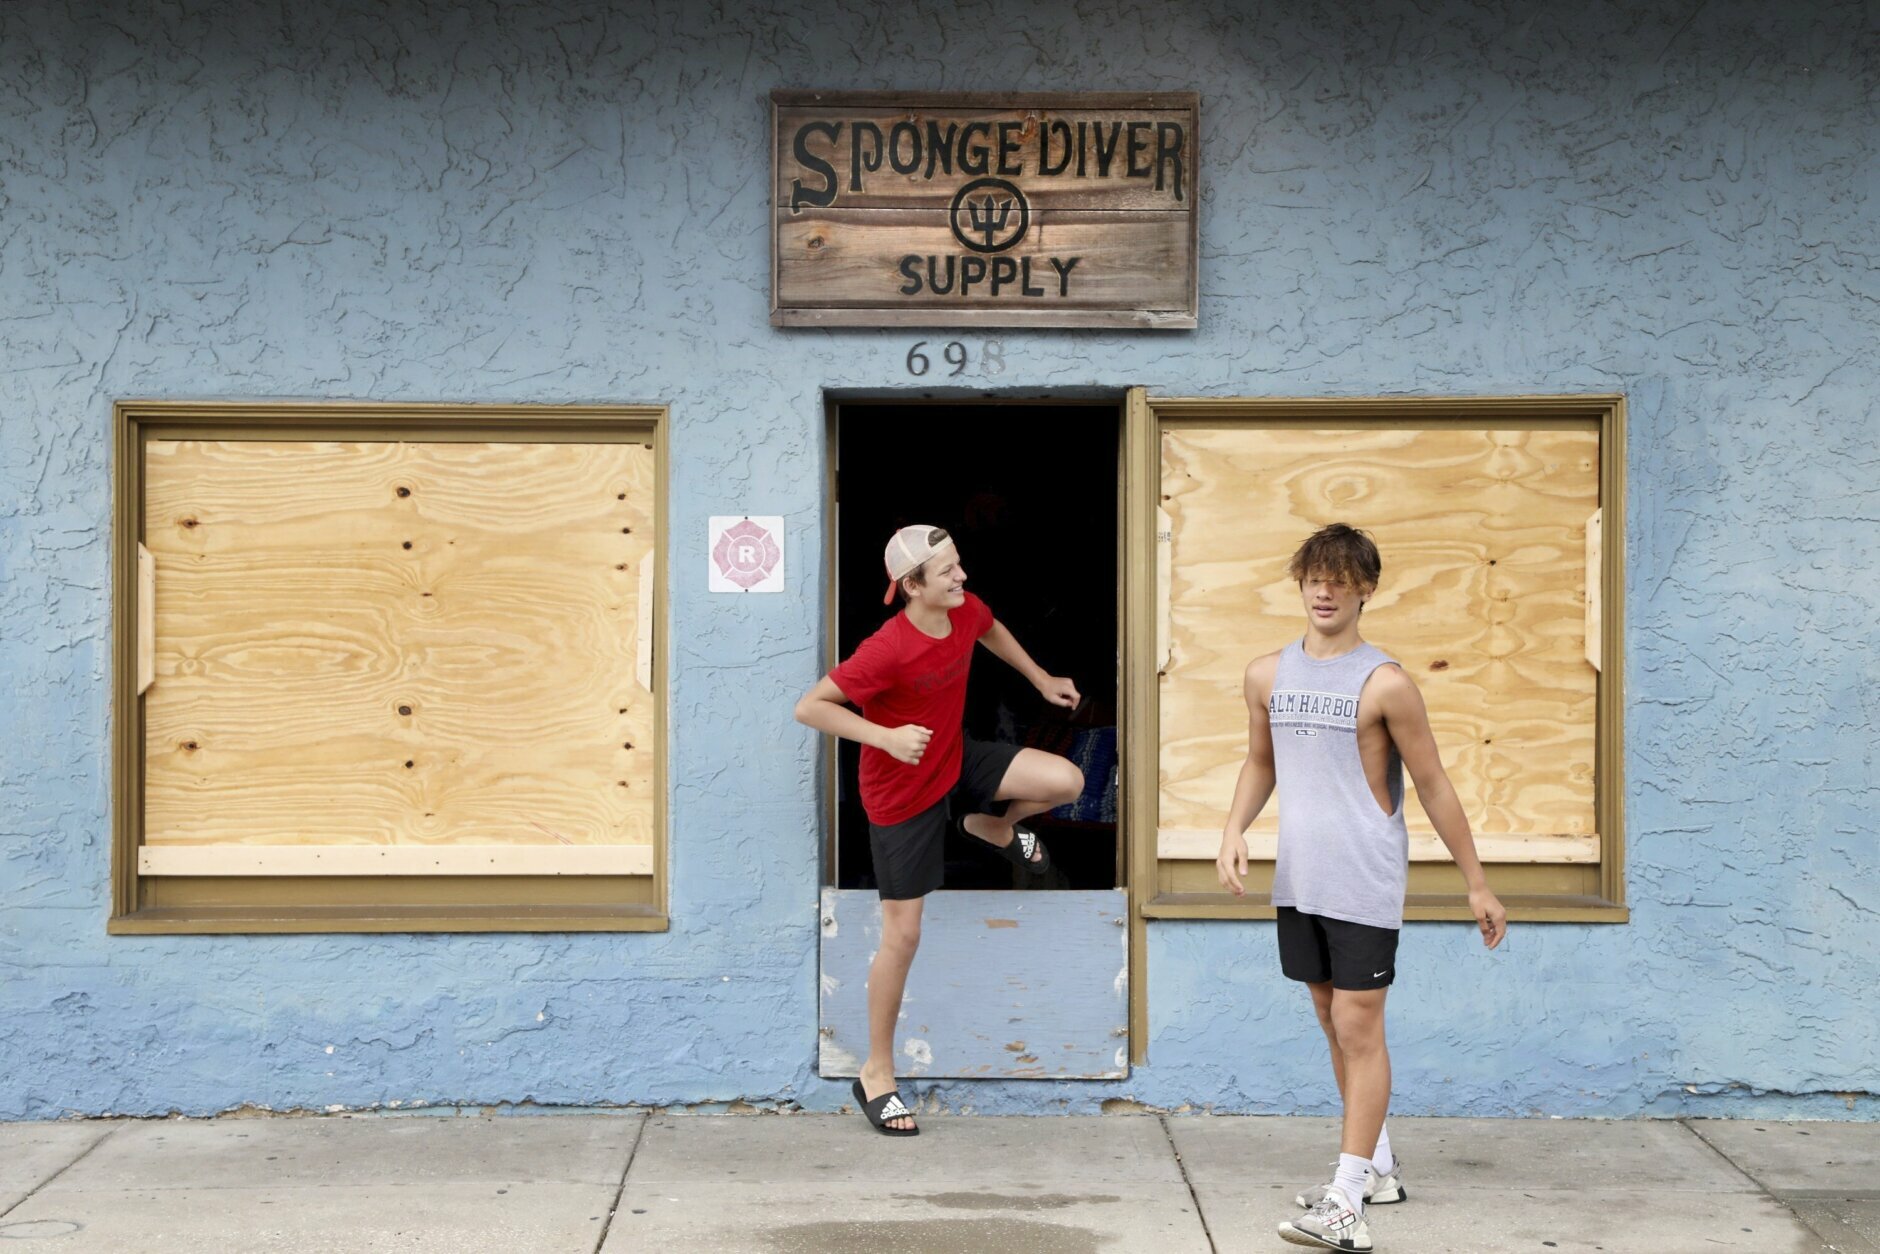 Athos Karistinos, 13, center, and his brother, Anastasios Karistinos, 16, emerge from their family's gift shop, Sponge Diver Supply, after helping their father fortify the windows and doors at the business on Dodecanese Blvd at the Tarpon Springs, Fla., Sponge Docks on Tuesday, July 6, 2021, where residents and business owners were preparing for the arrival of Tropical Storm Elsa. (Douglas R. Clifford/Tampa Bay Times via AP)